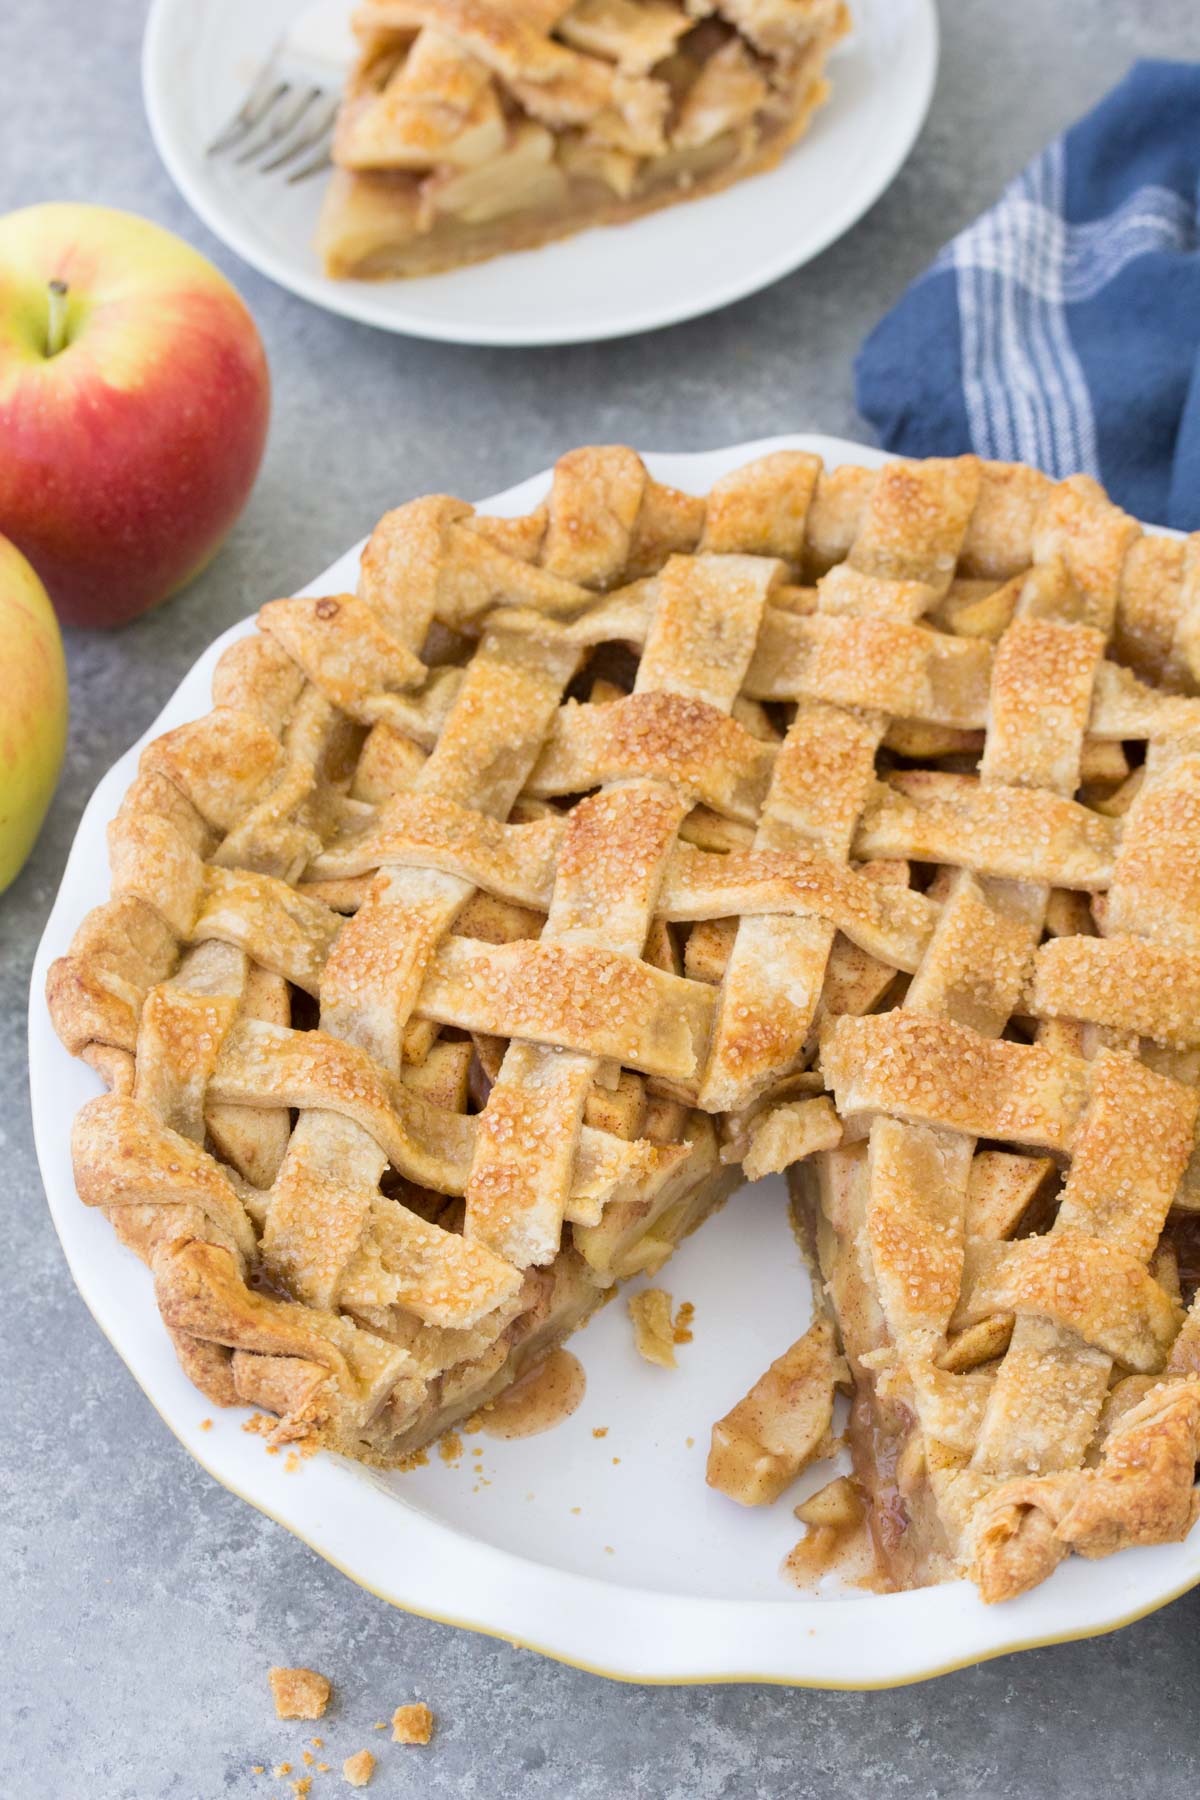 Whole apple pie with one slice removed.